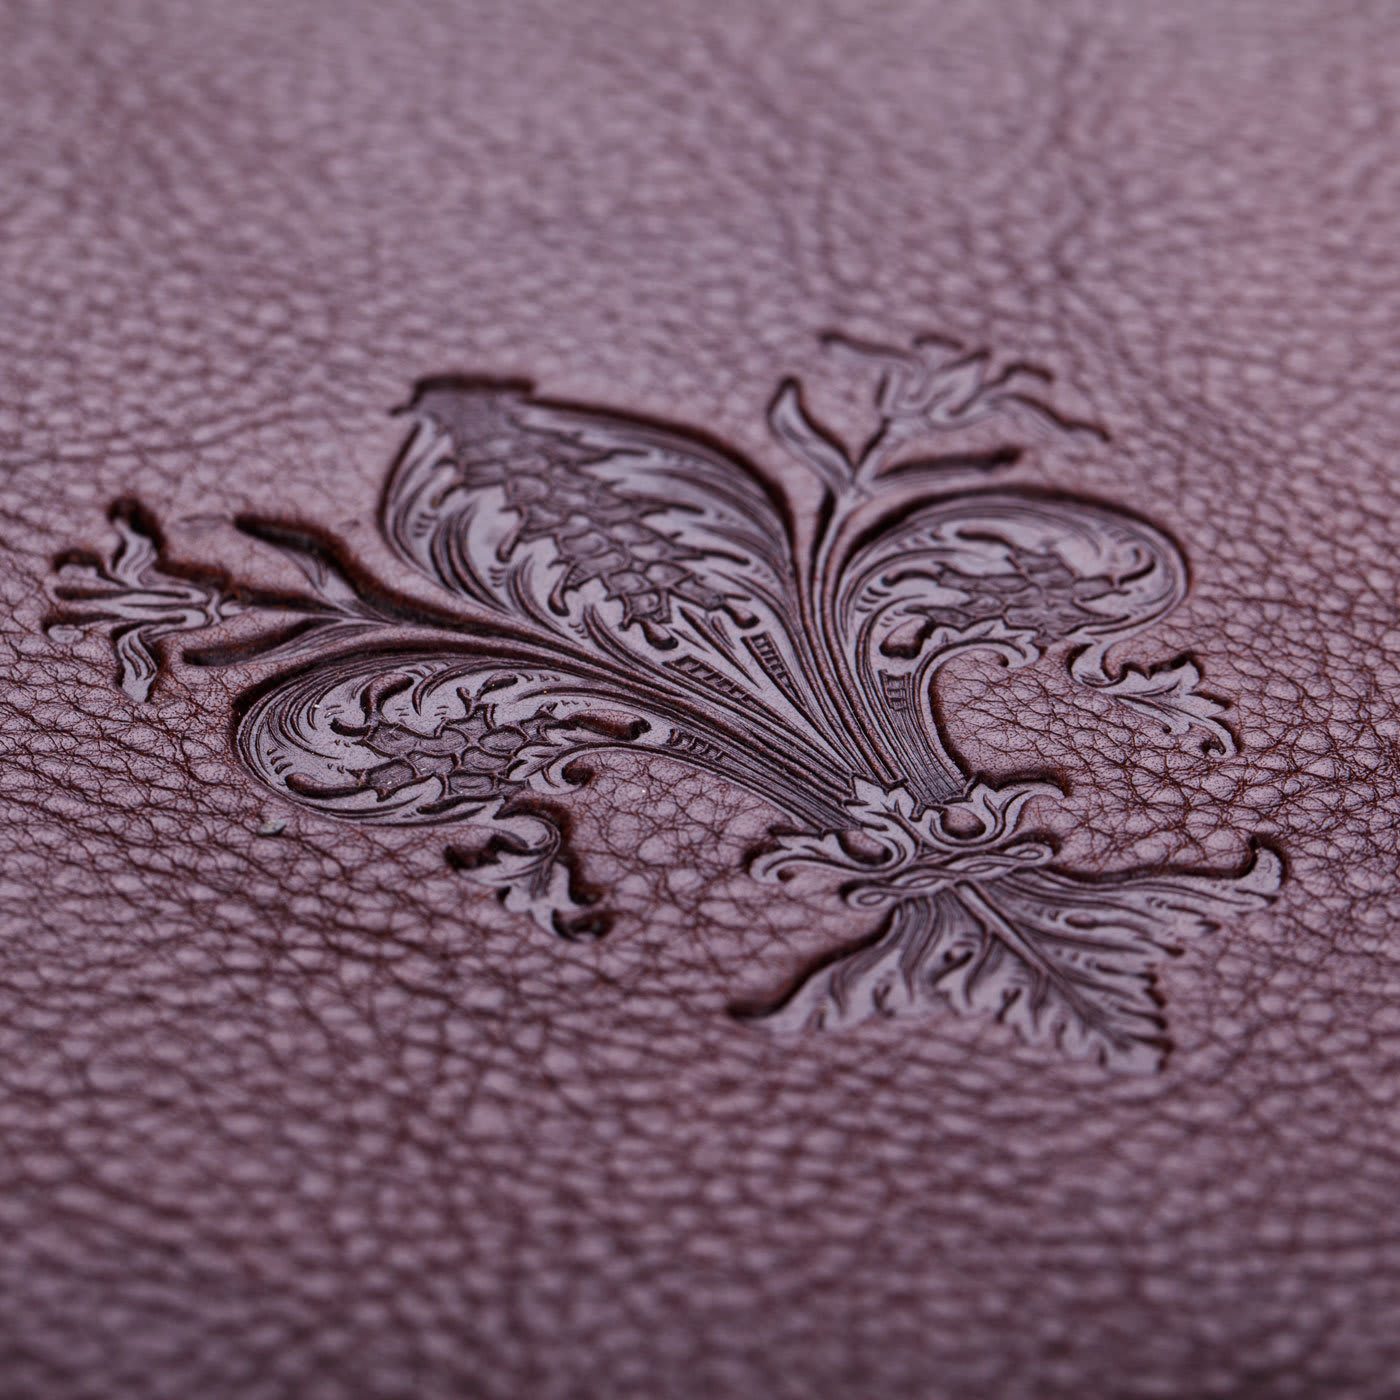 Lily Brown Leather Notebook - Giannini